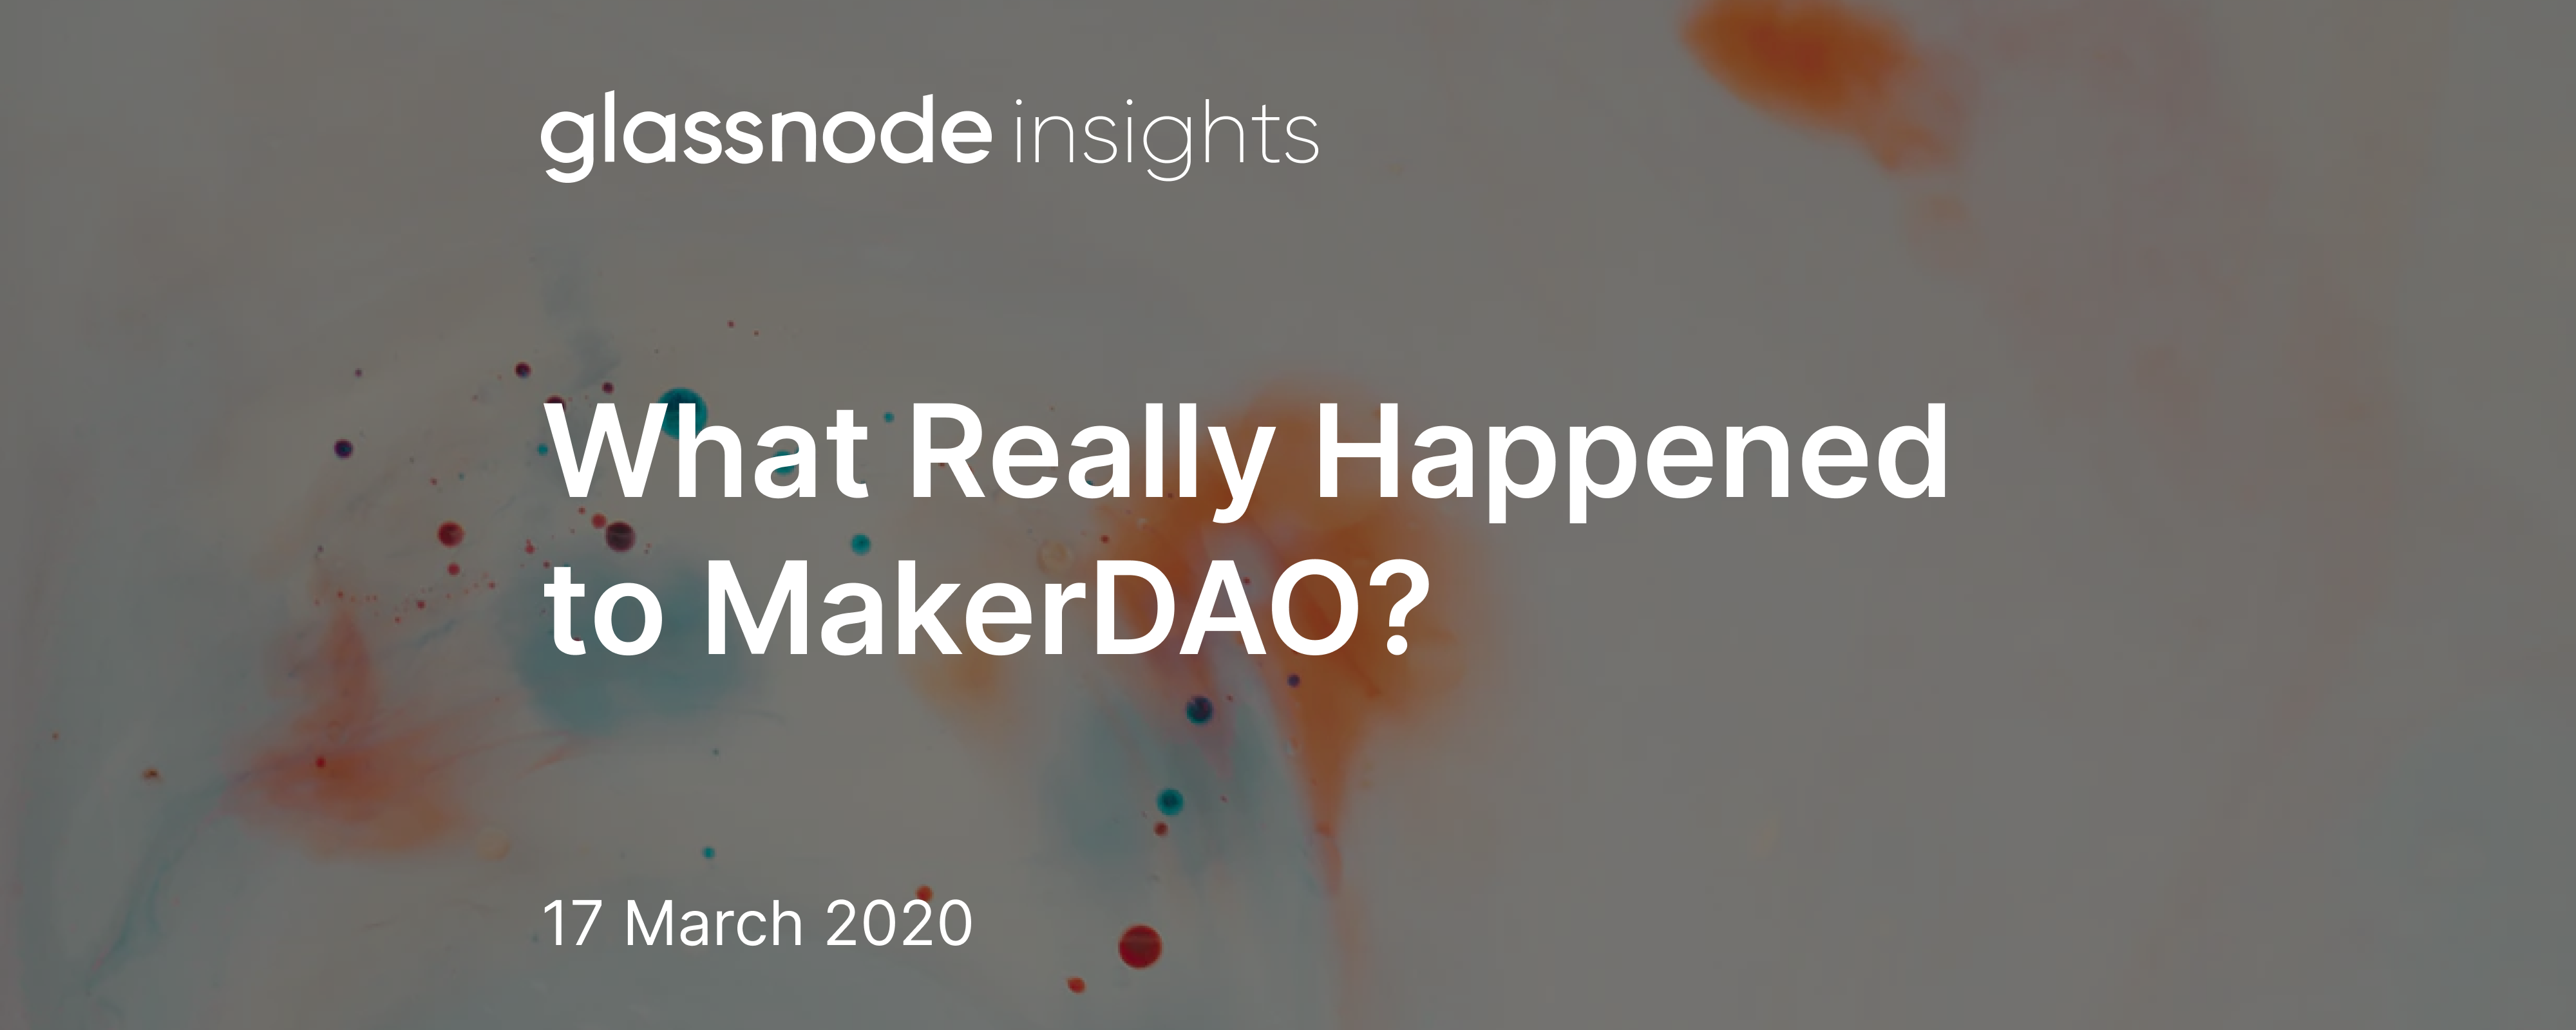 What Really Happened To MakerDAO?